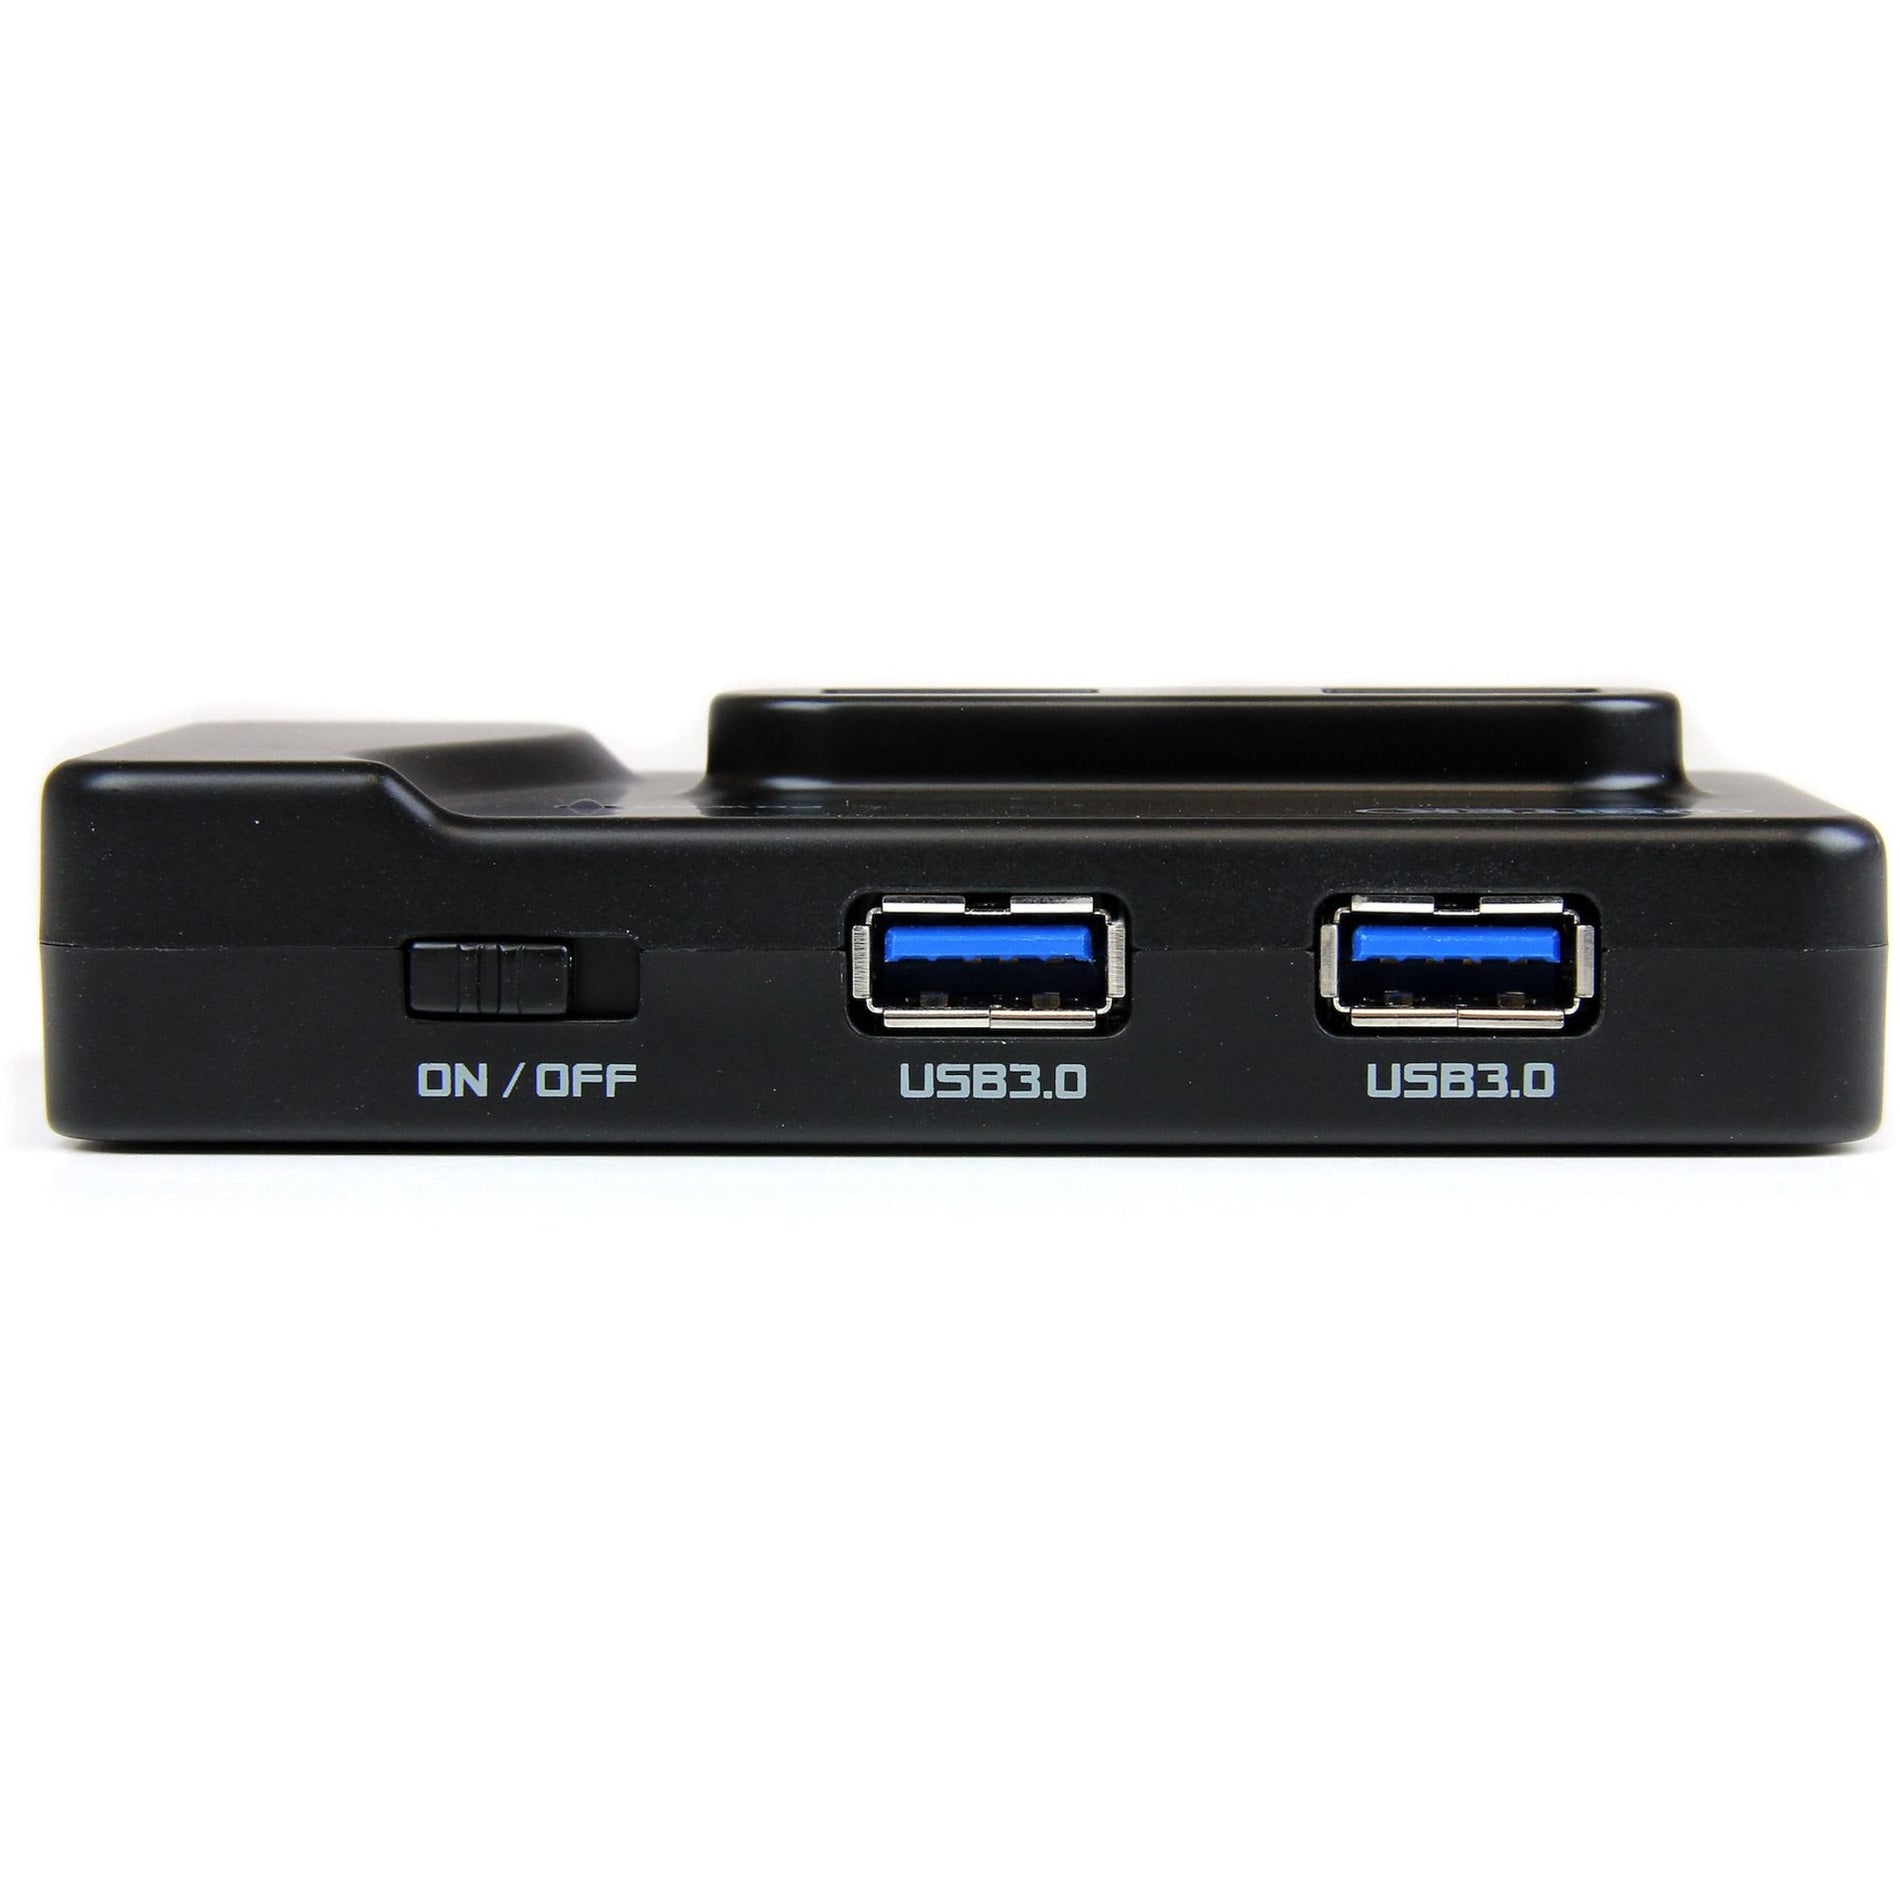 StarTech.com ST7320USBC 6-port USB 3.0/2.0 Combo Hub with Charging Port Expand Your USB Connectivity